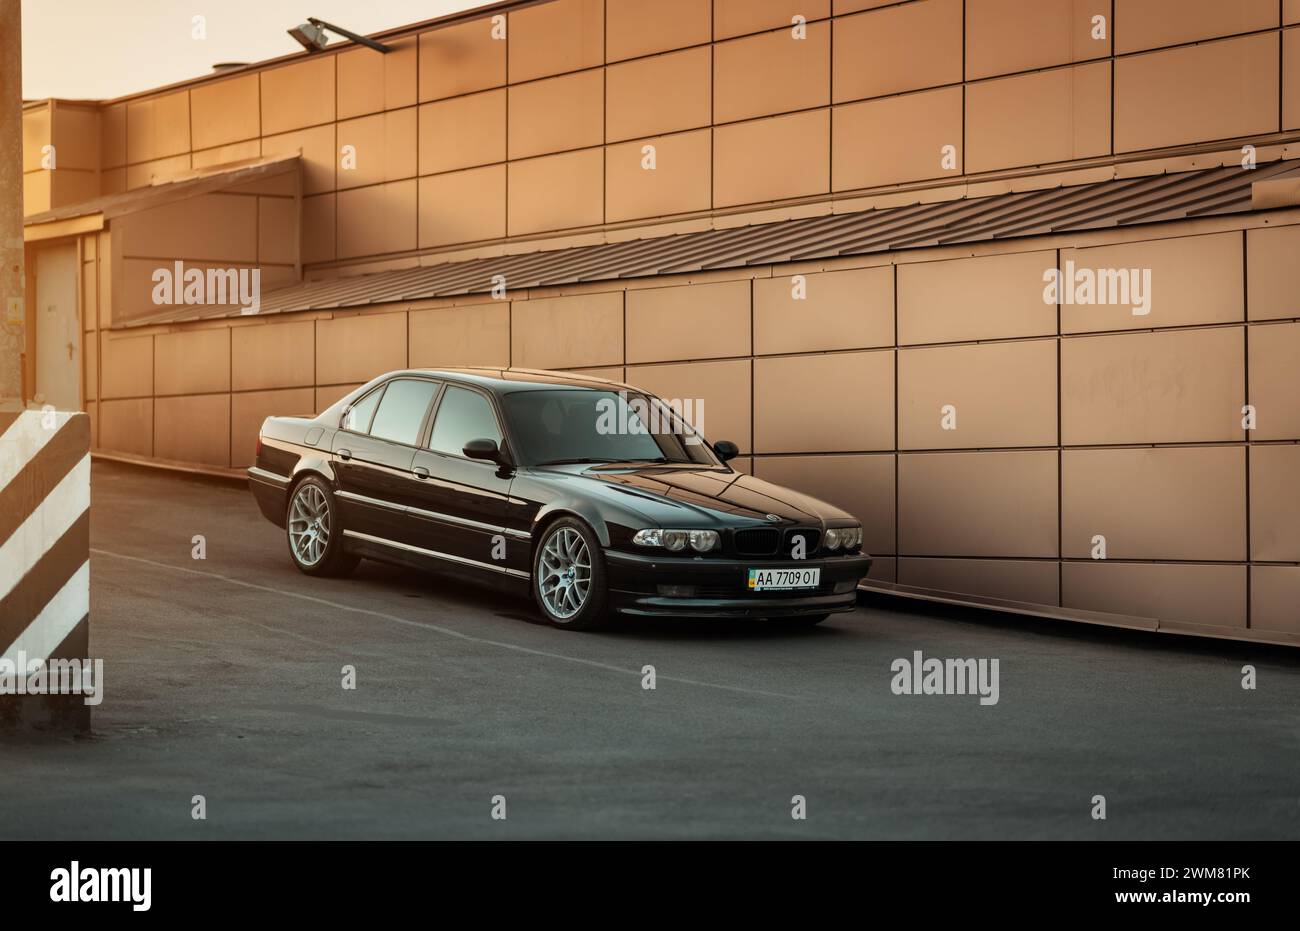 Black BMW 7-series (E38) sedan parked near beige brown-bronze wall. Three quarter front view of 1990s executive car. Stock Photo